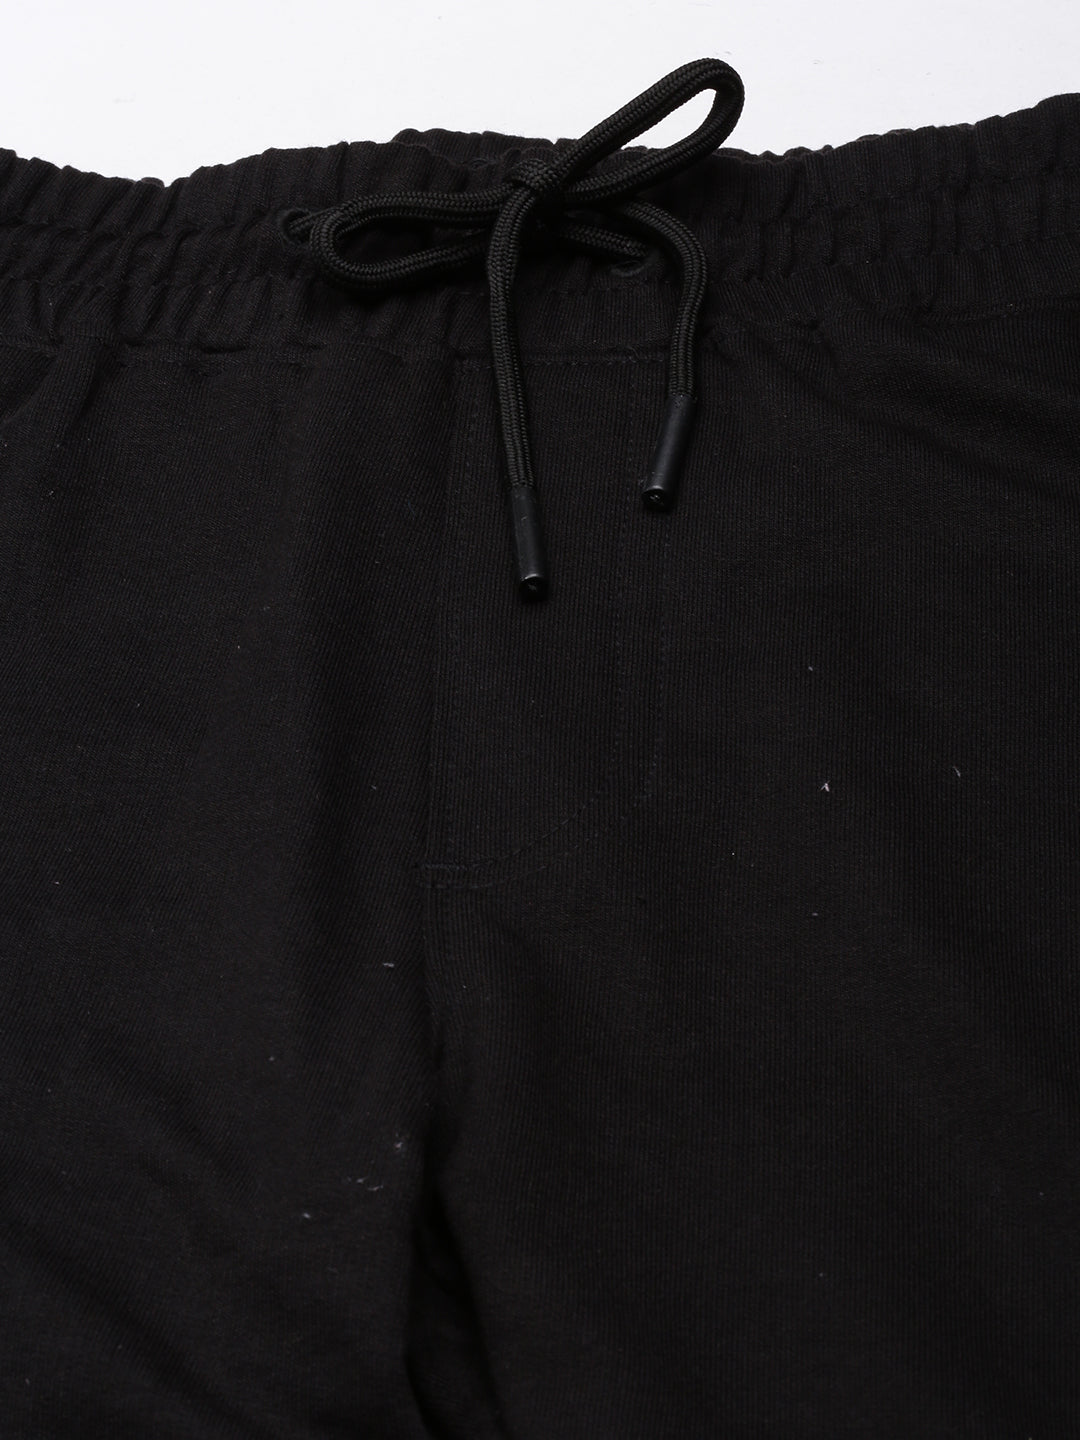 Solid Black Cotton Shorts With Side Panel